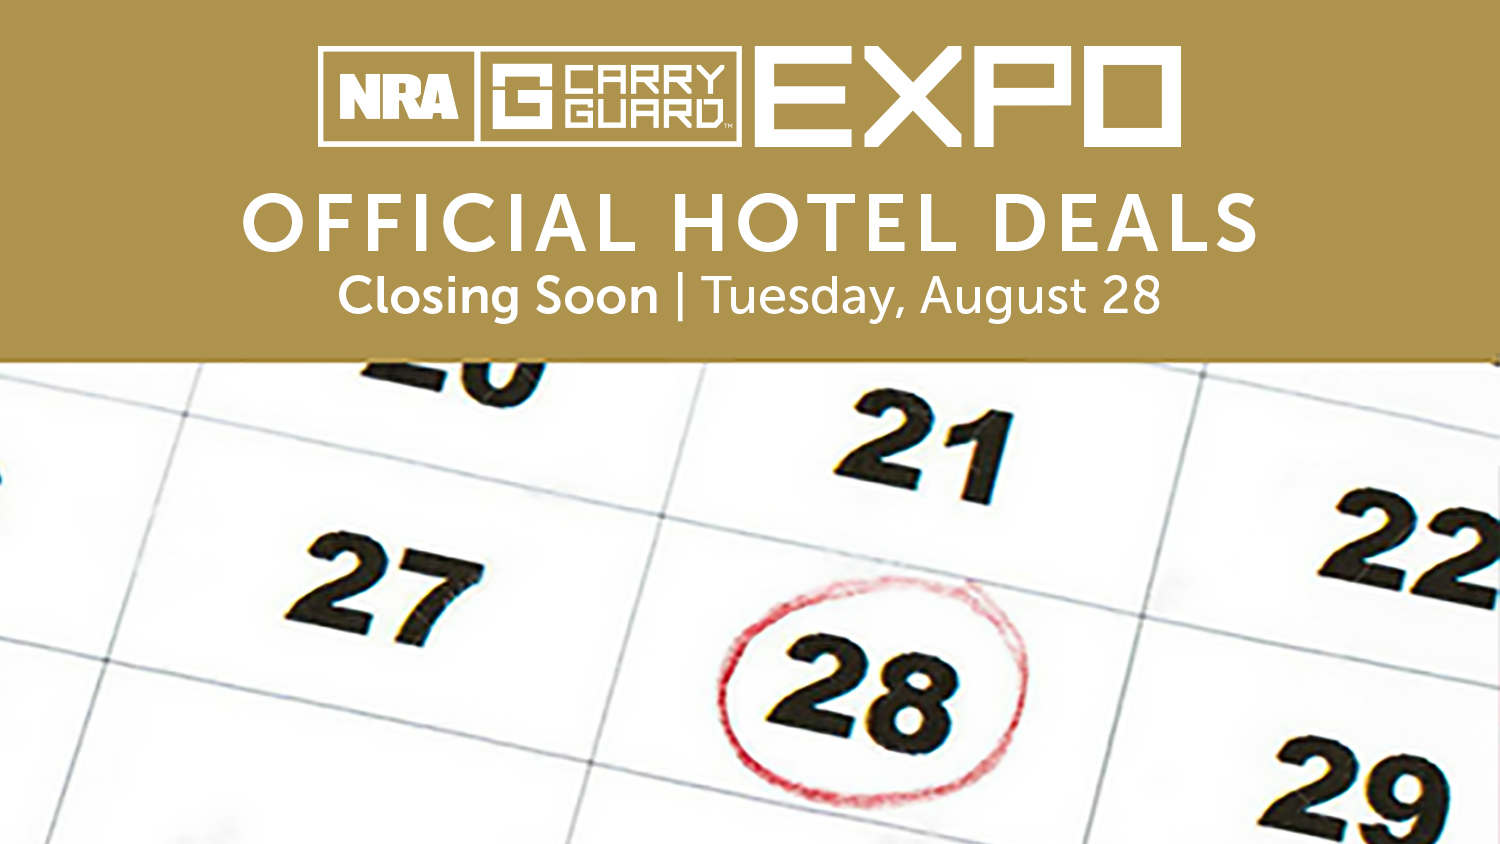 NRA Carry Guard Expo Hotel Deals Closing Soon